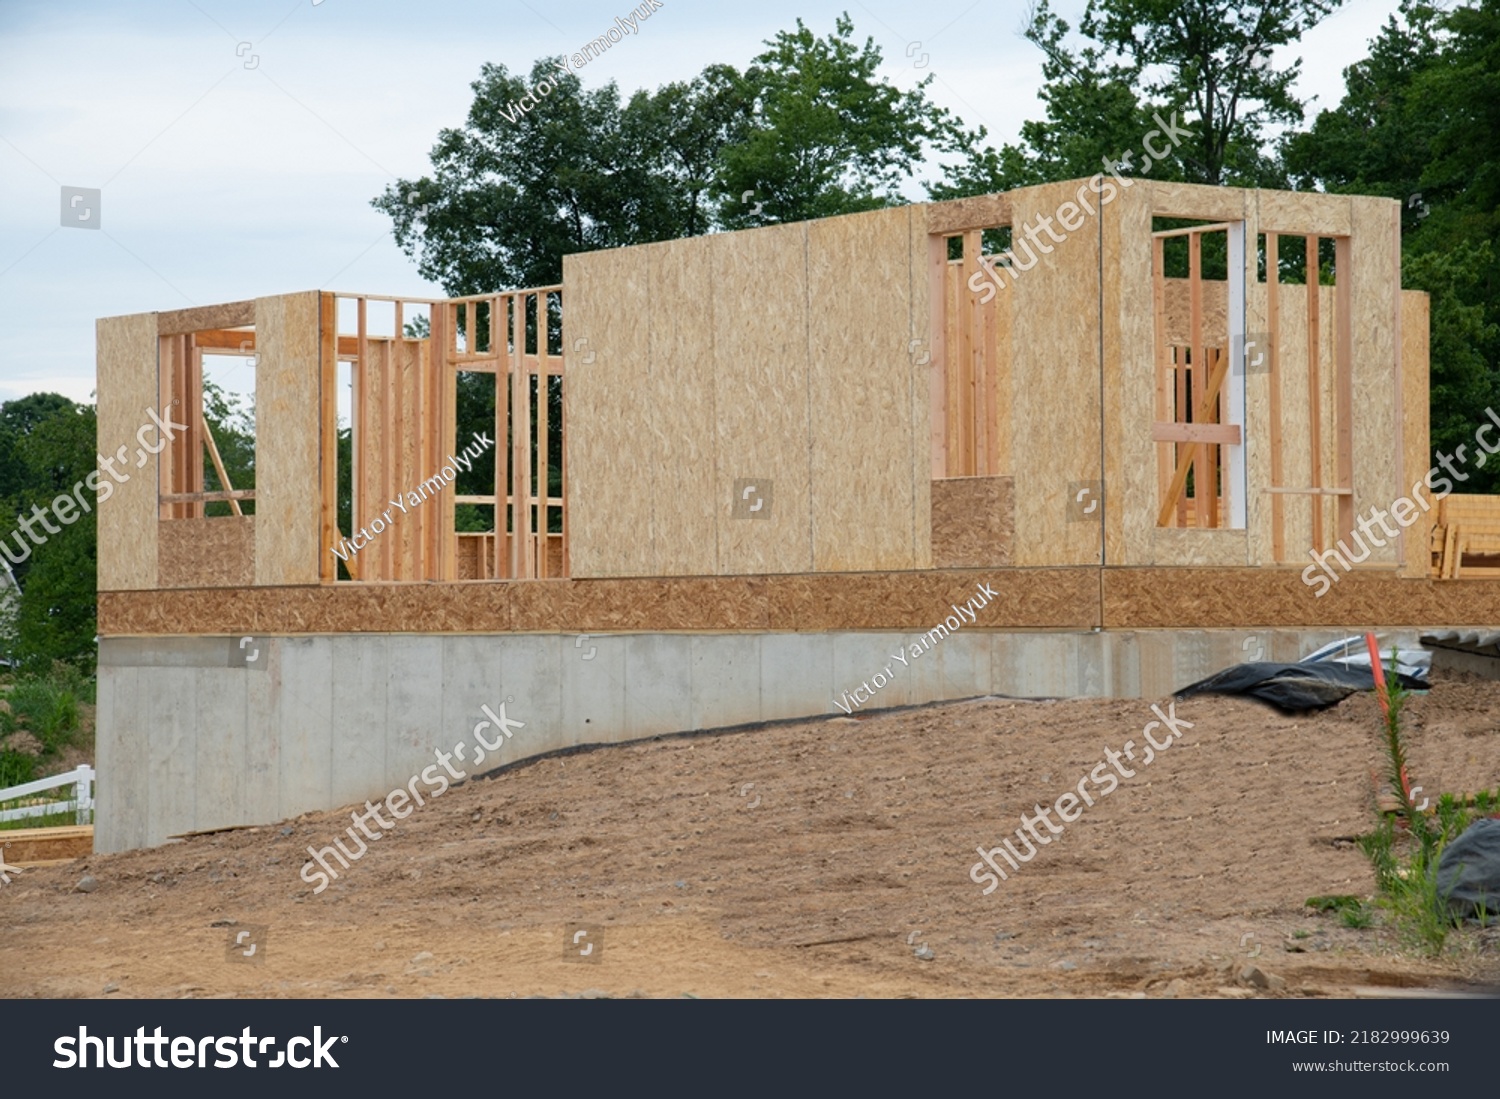 foundation and framework for the new plywood house wooden lumber beam plank board beam material #2182999639